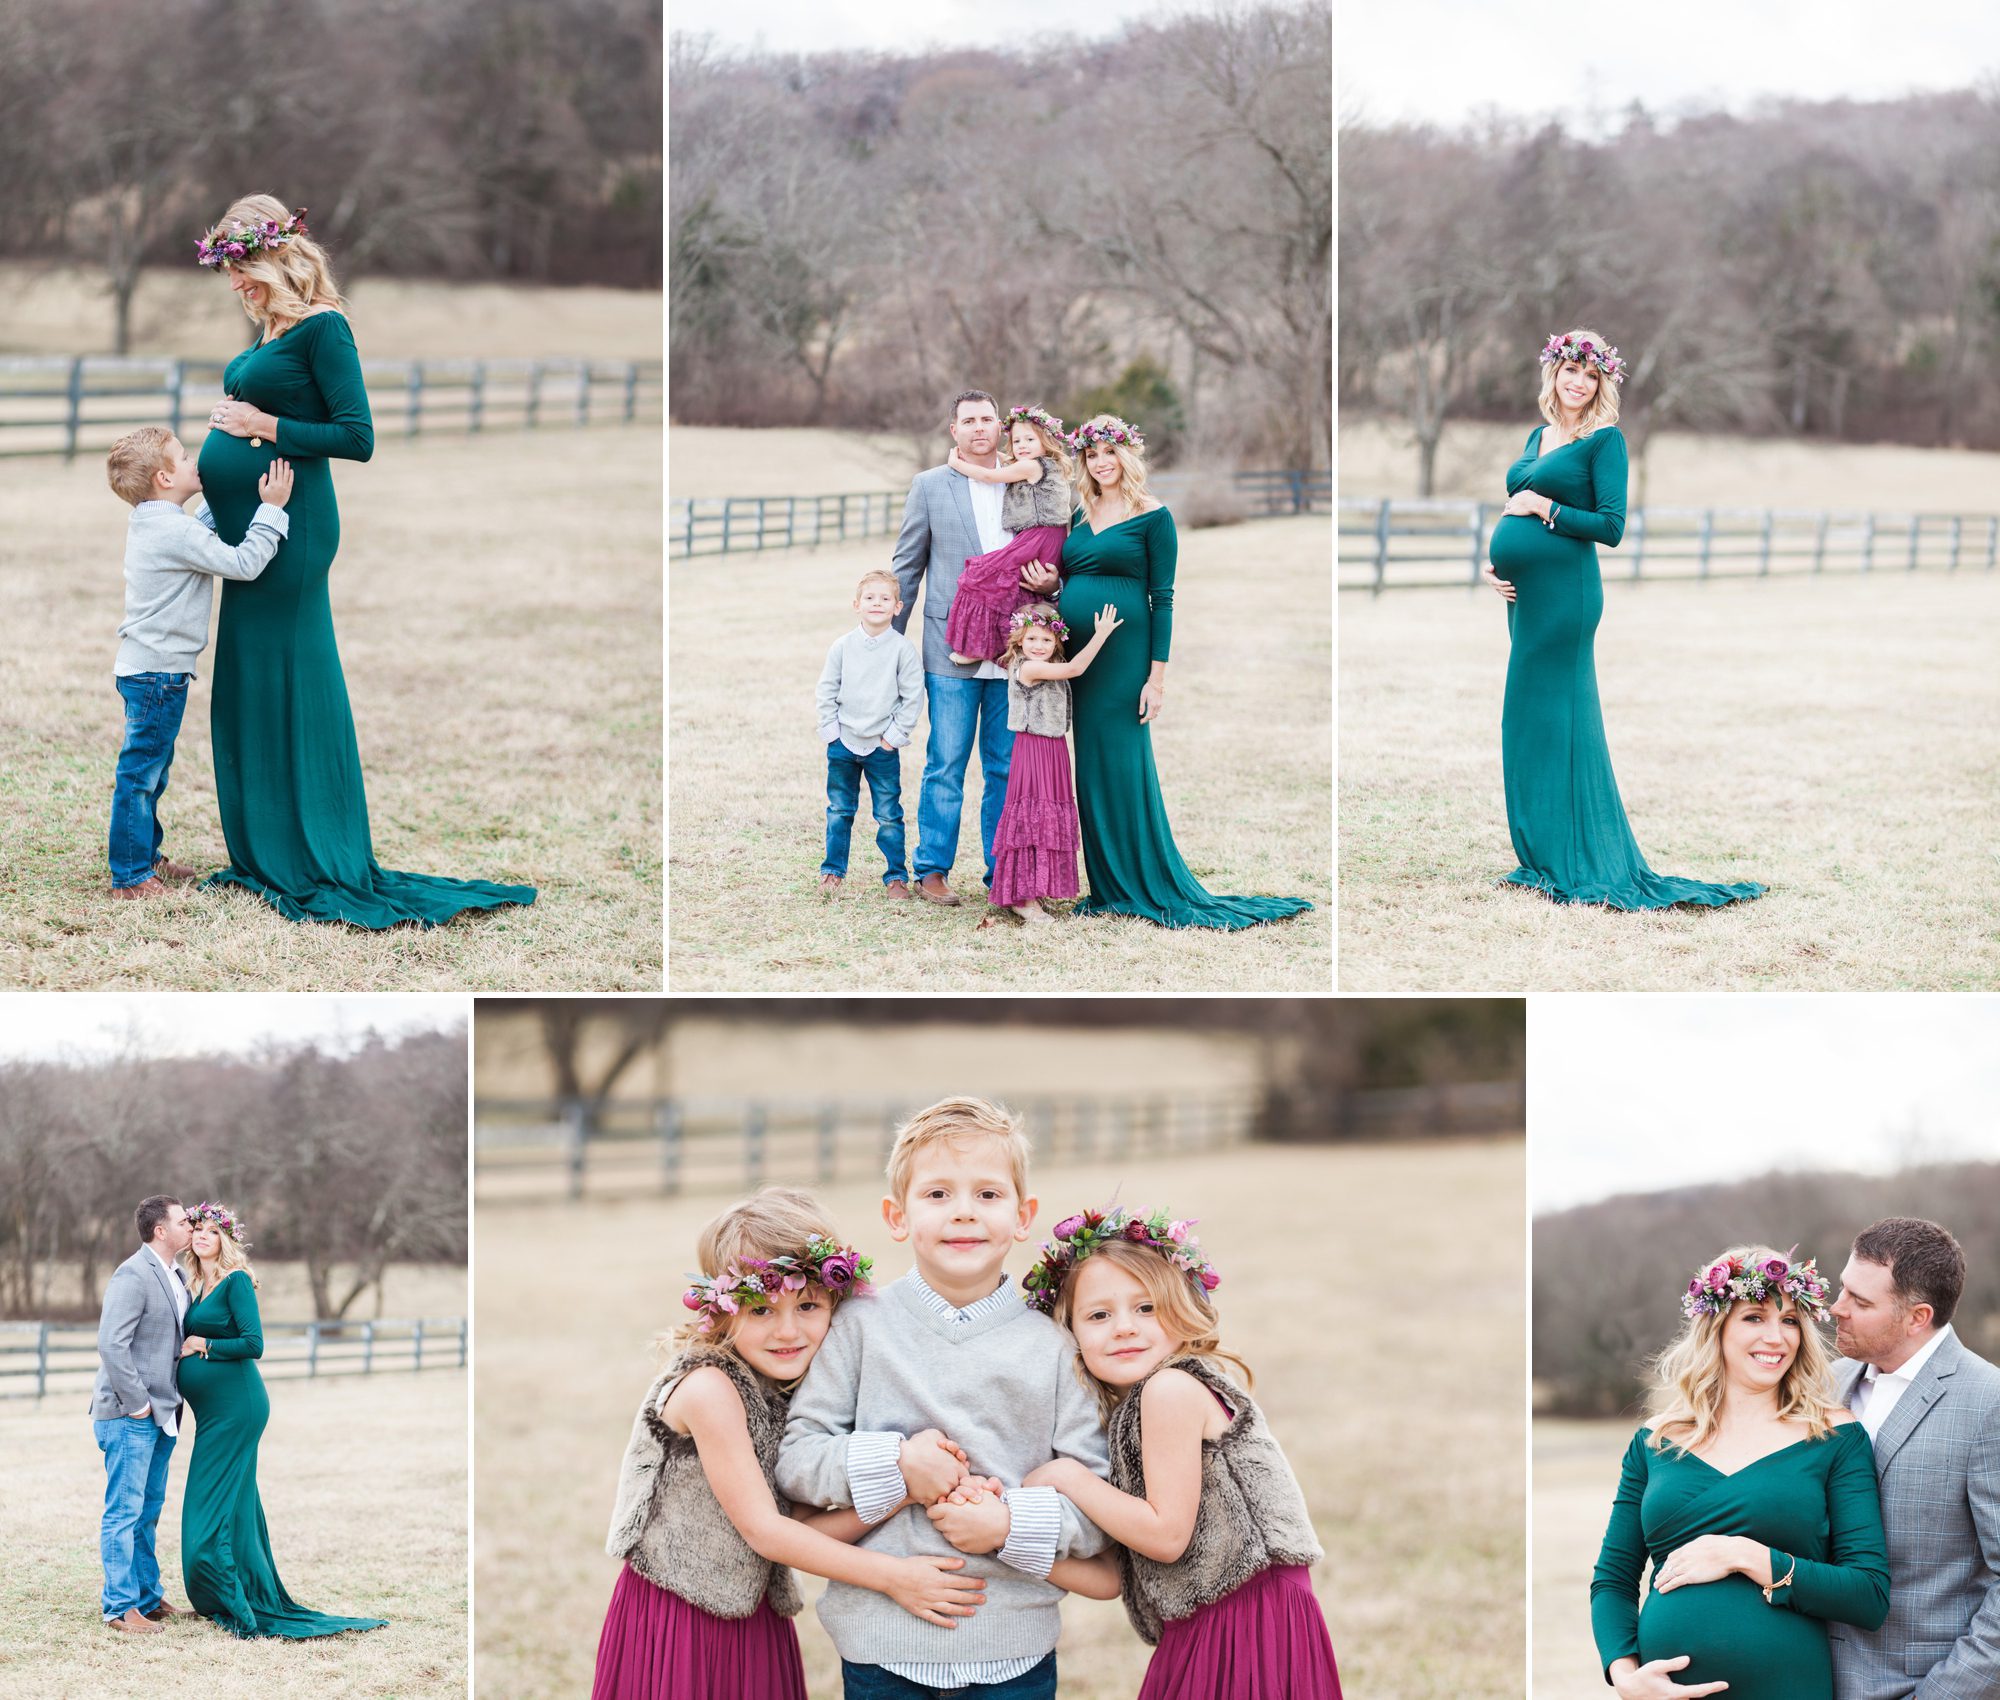 Rich jewel tones for Winter Family Maternity Photo Session in Brentwood, TN. Photo by Krista Lee Photography Nashville TN